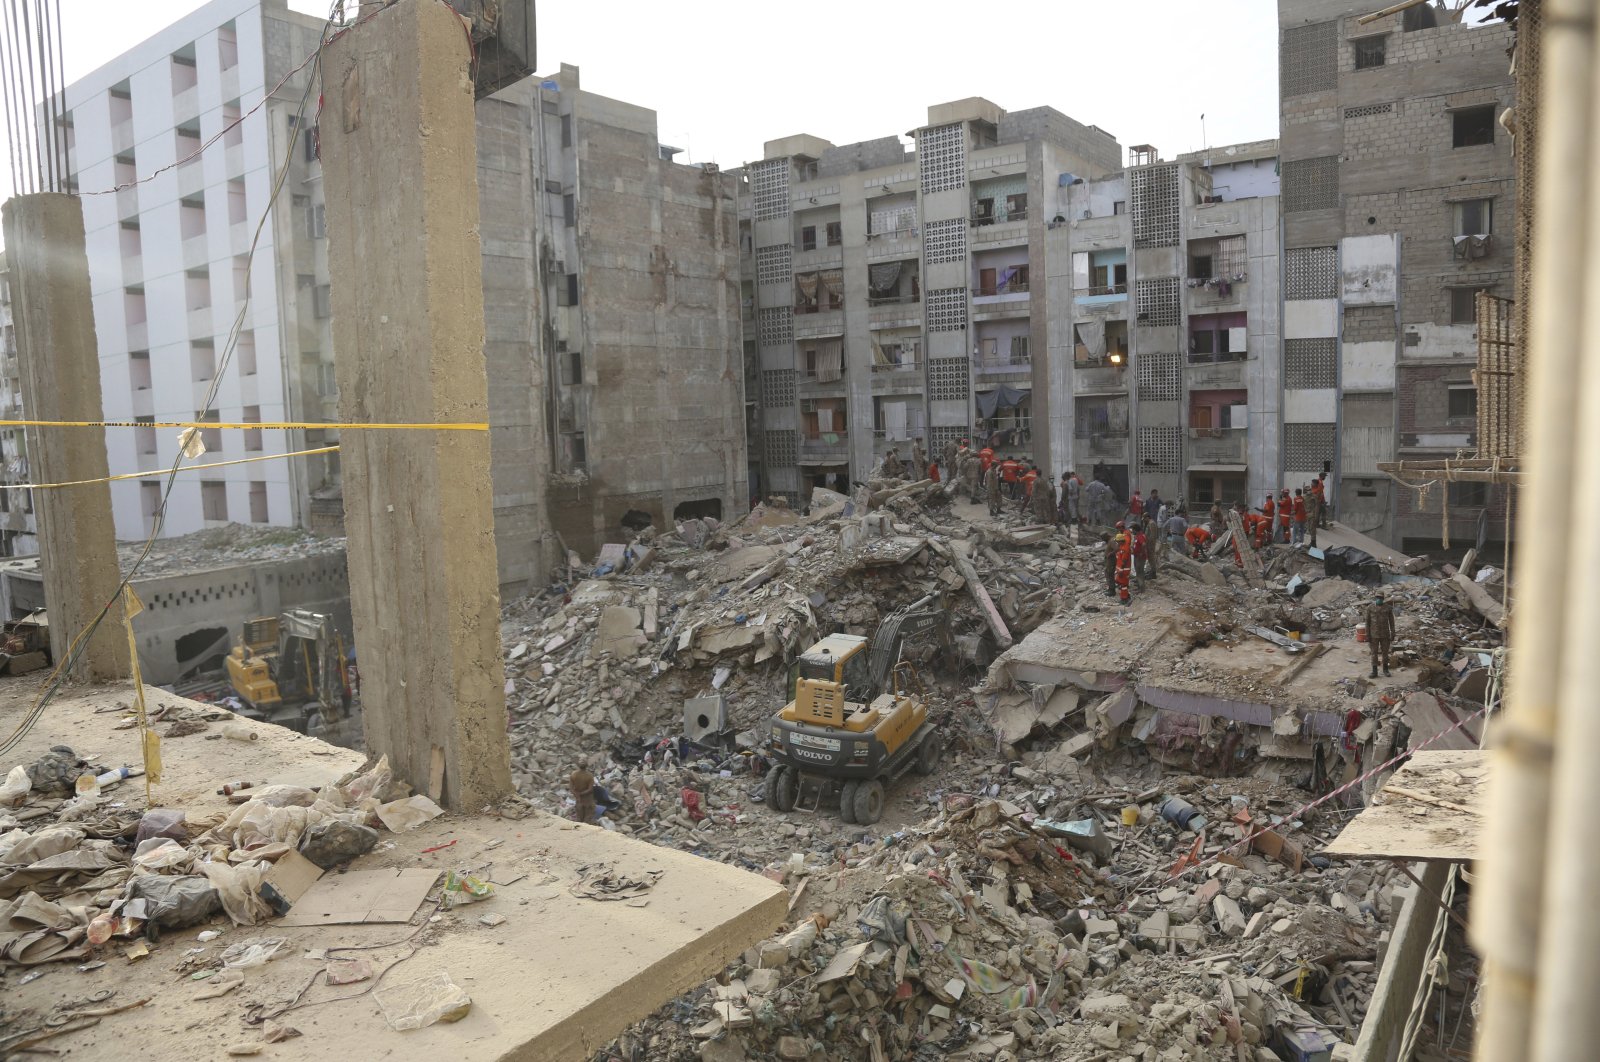 Pakistani troops, rescue workers and volunteers look for survivors amid the rubble of a collapsed building in Karachi, Pakistan, June 8, 2020. (AP Photo)